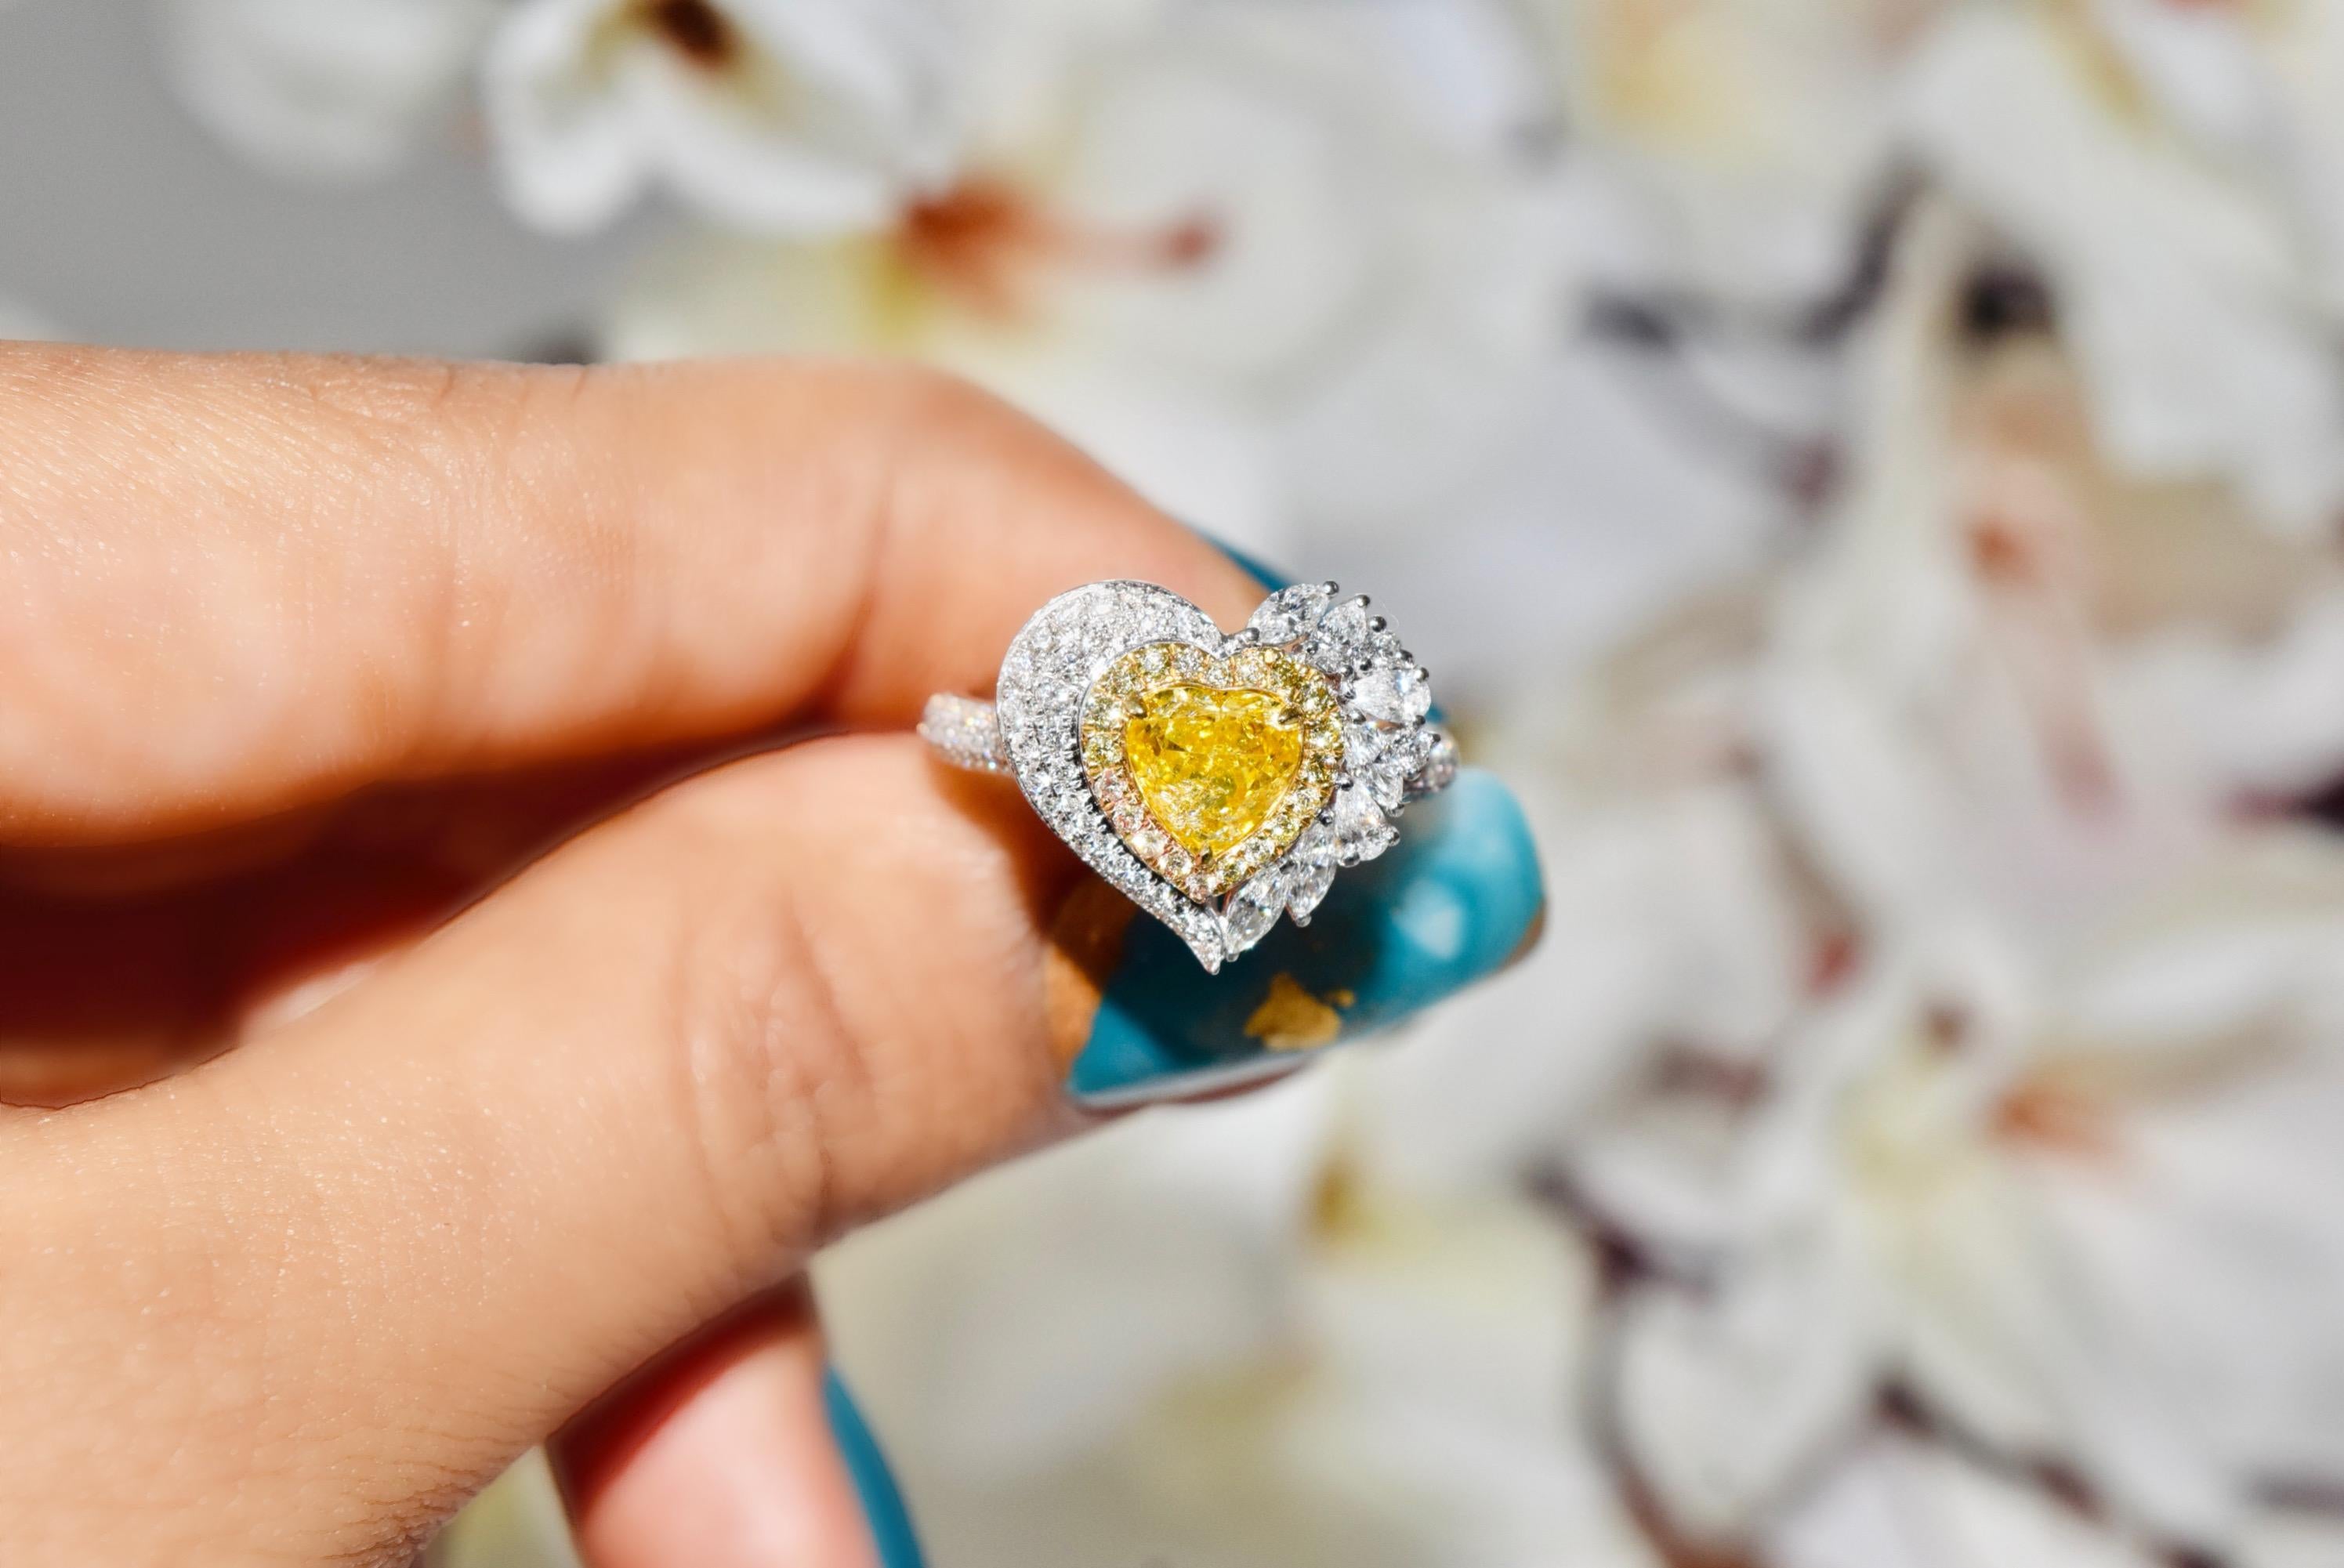 **100% NATURAL FANCY COLOUR DIAMOND JEWELLERIES**

✪ Jewelry Details ✪

♦ MAIN STONE DETAILS

➛ Stone Shape: Heart
➛ Stone Color: Fancy yellow
➛ Stone Weight: 1.02 carats
➛ AGL certified

♦ SIDE STONE DETAILS

➛ Side White diamond -99 pcs- 0.356